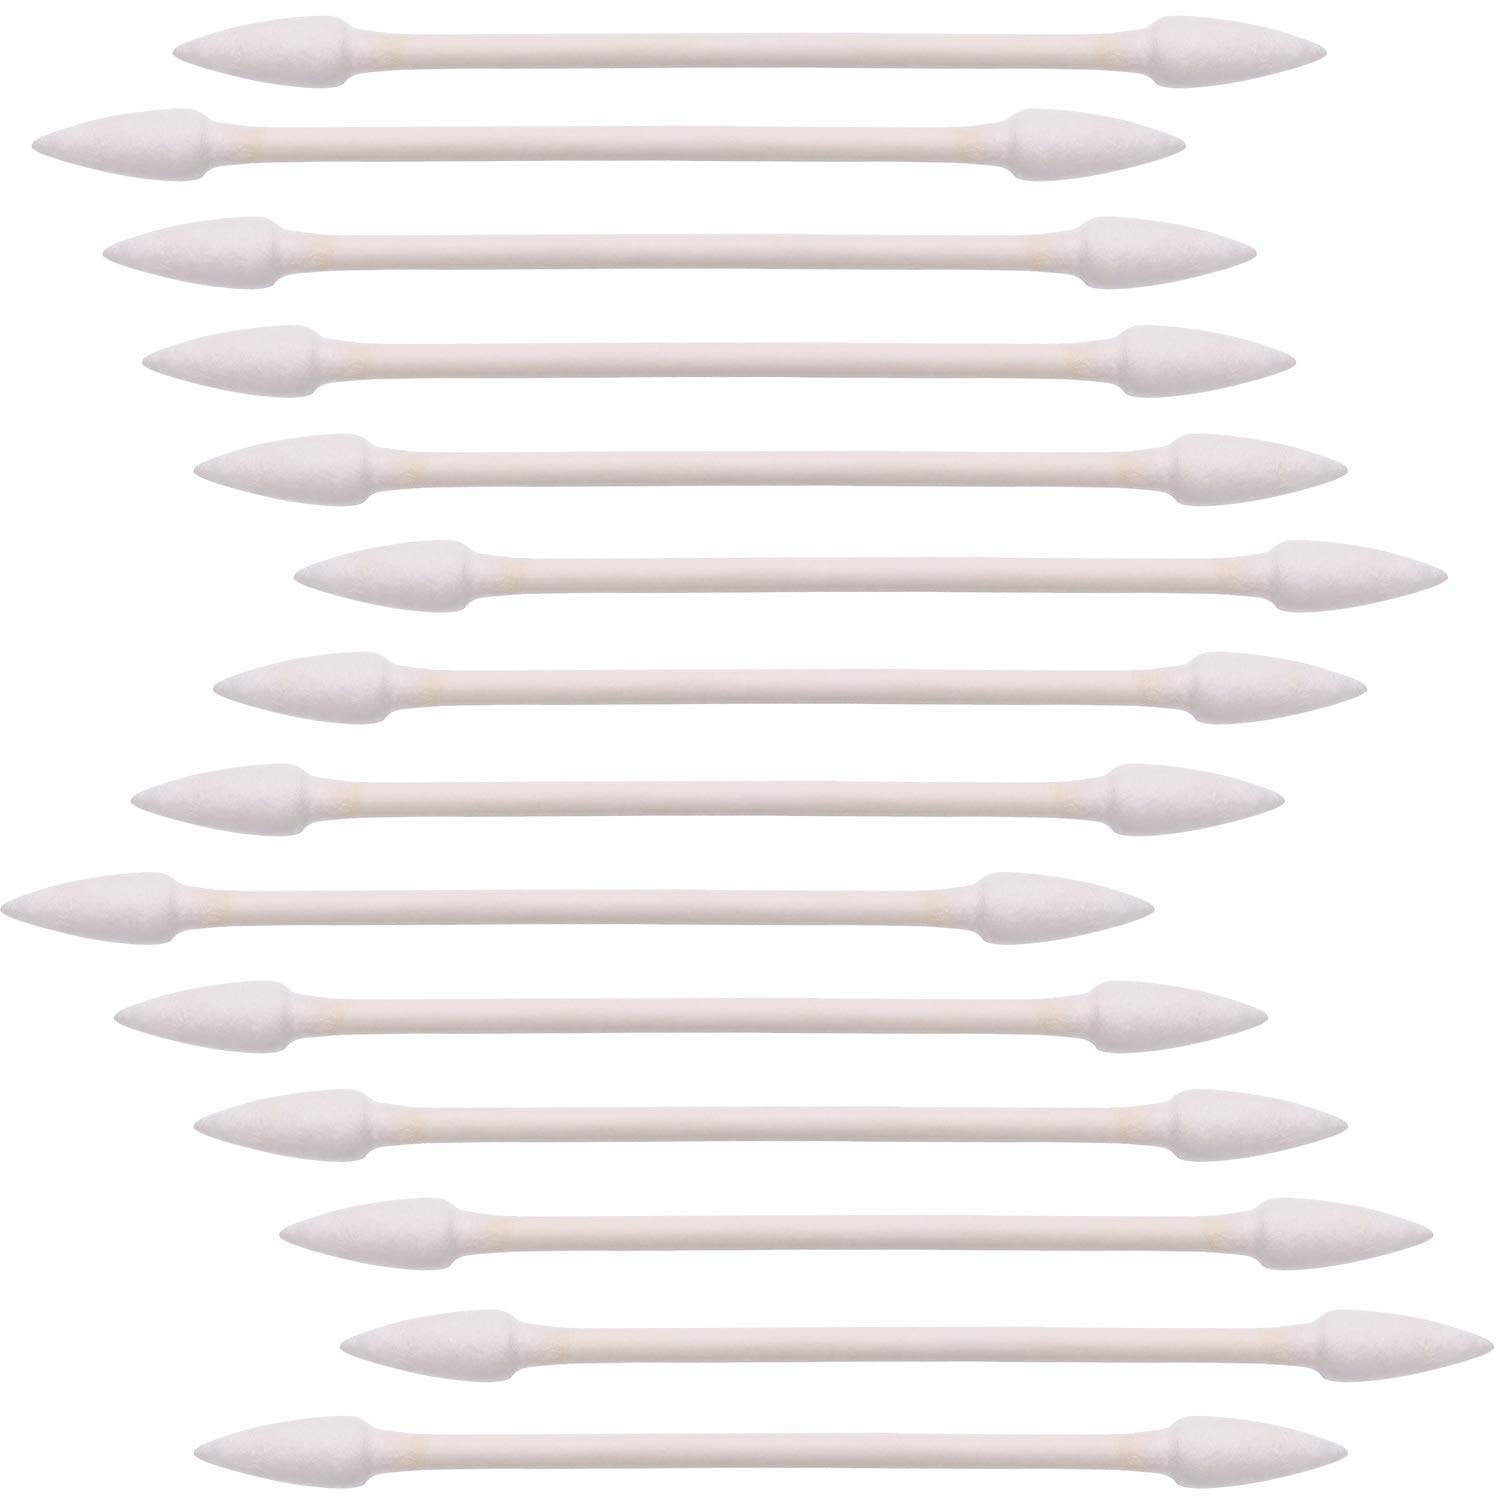 cotton swabs (like Q-tips) that have pointed cotton ends instead of the regular rounded cotton ends